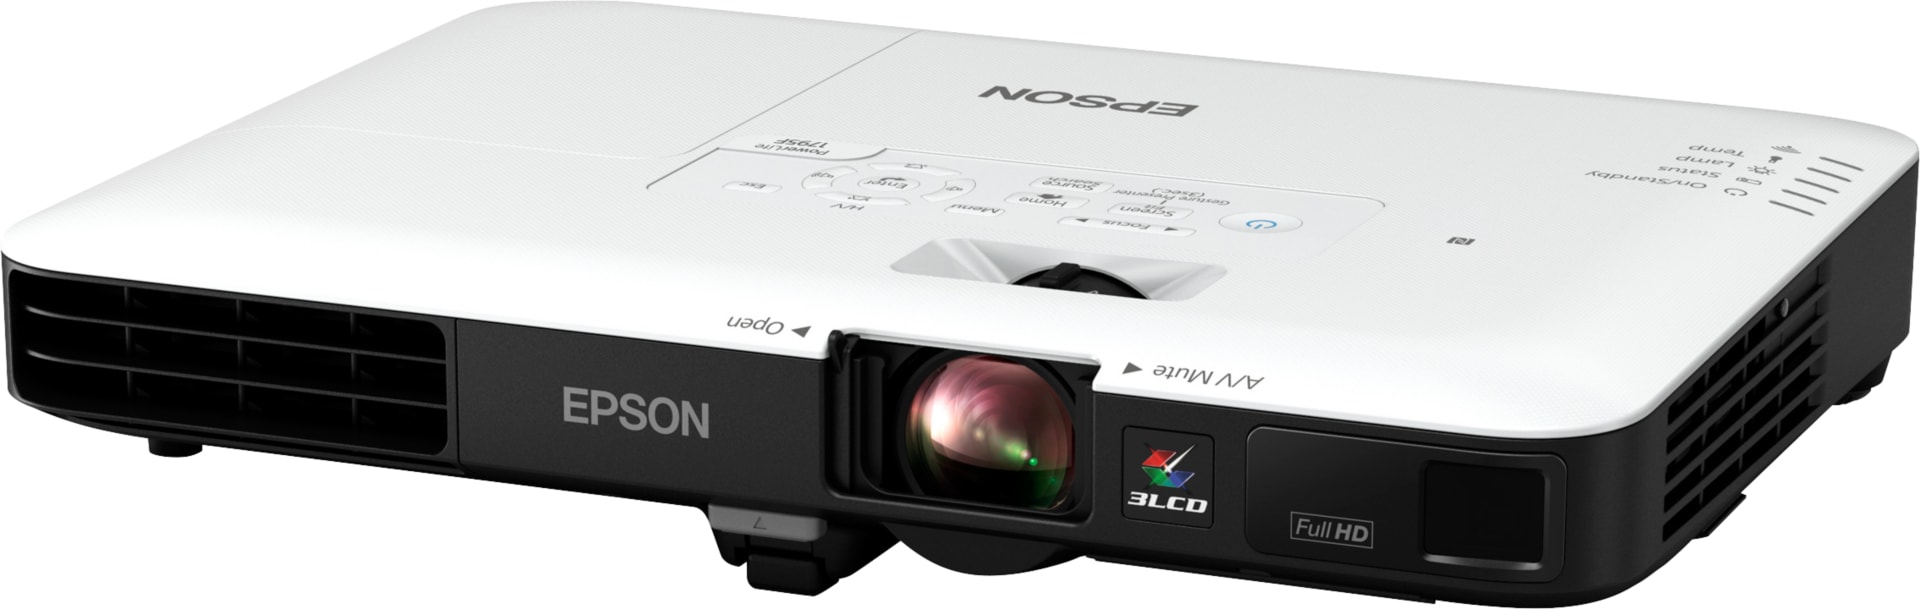 Epson PowerLite 1795F - 3LCD projector - portable - Wi-Fi